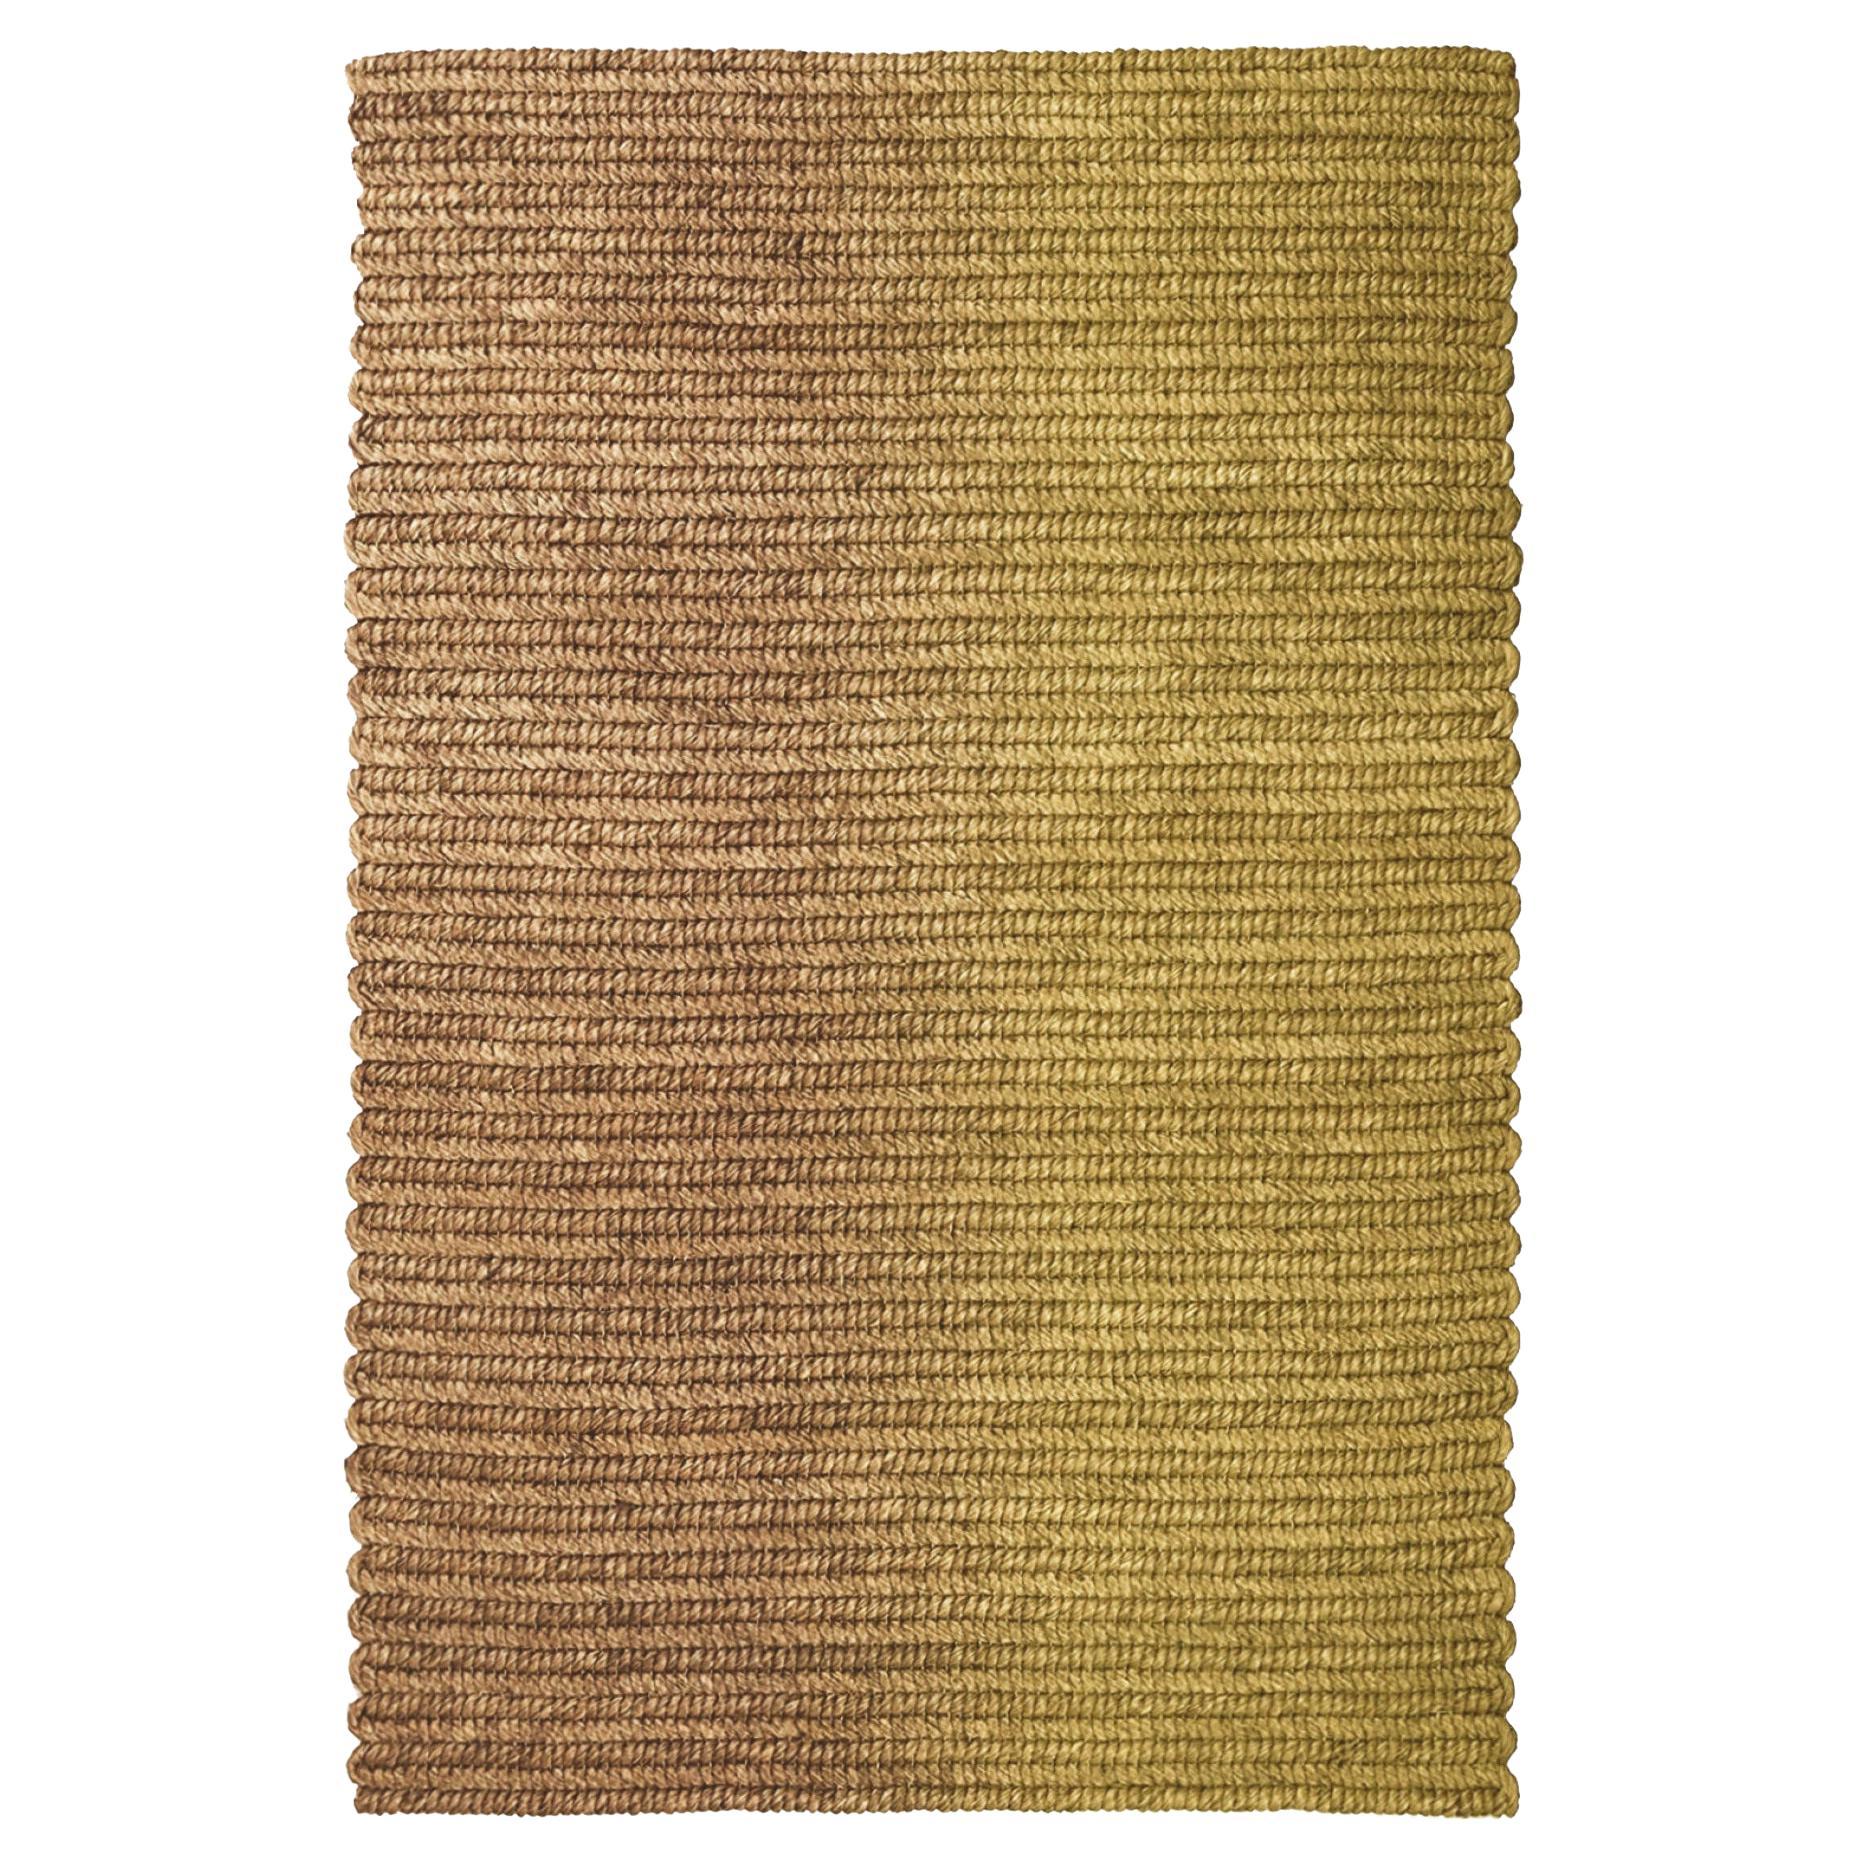 'Switch' Rug in Abaca, 'Spice' by Claire Vos for Musett Design For Sale